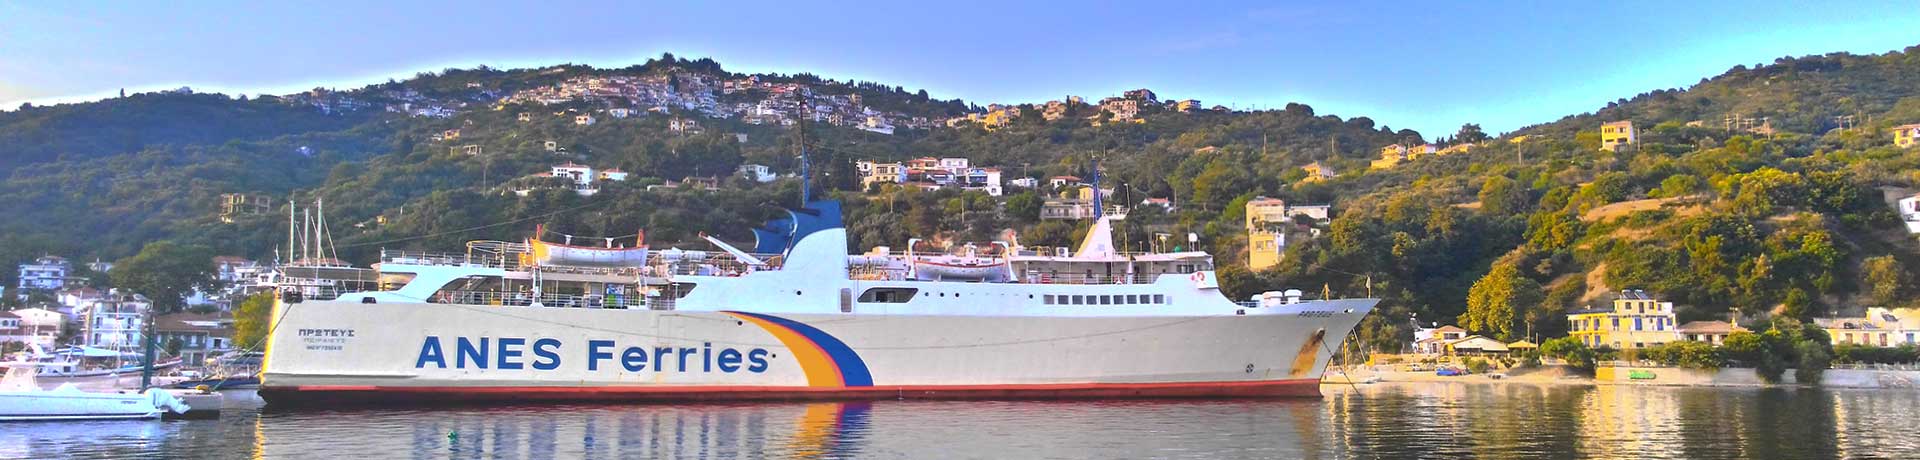 Main top decorational image for Anes Ferries